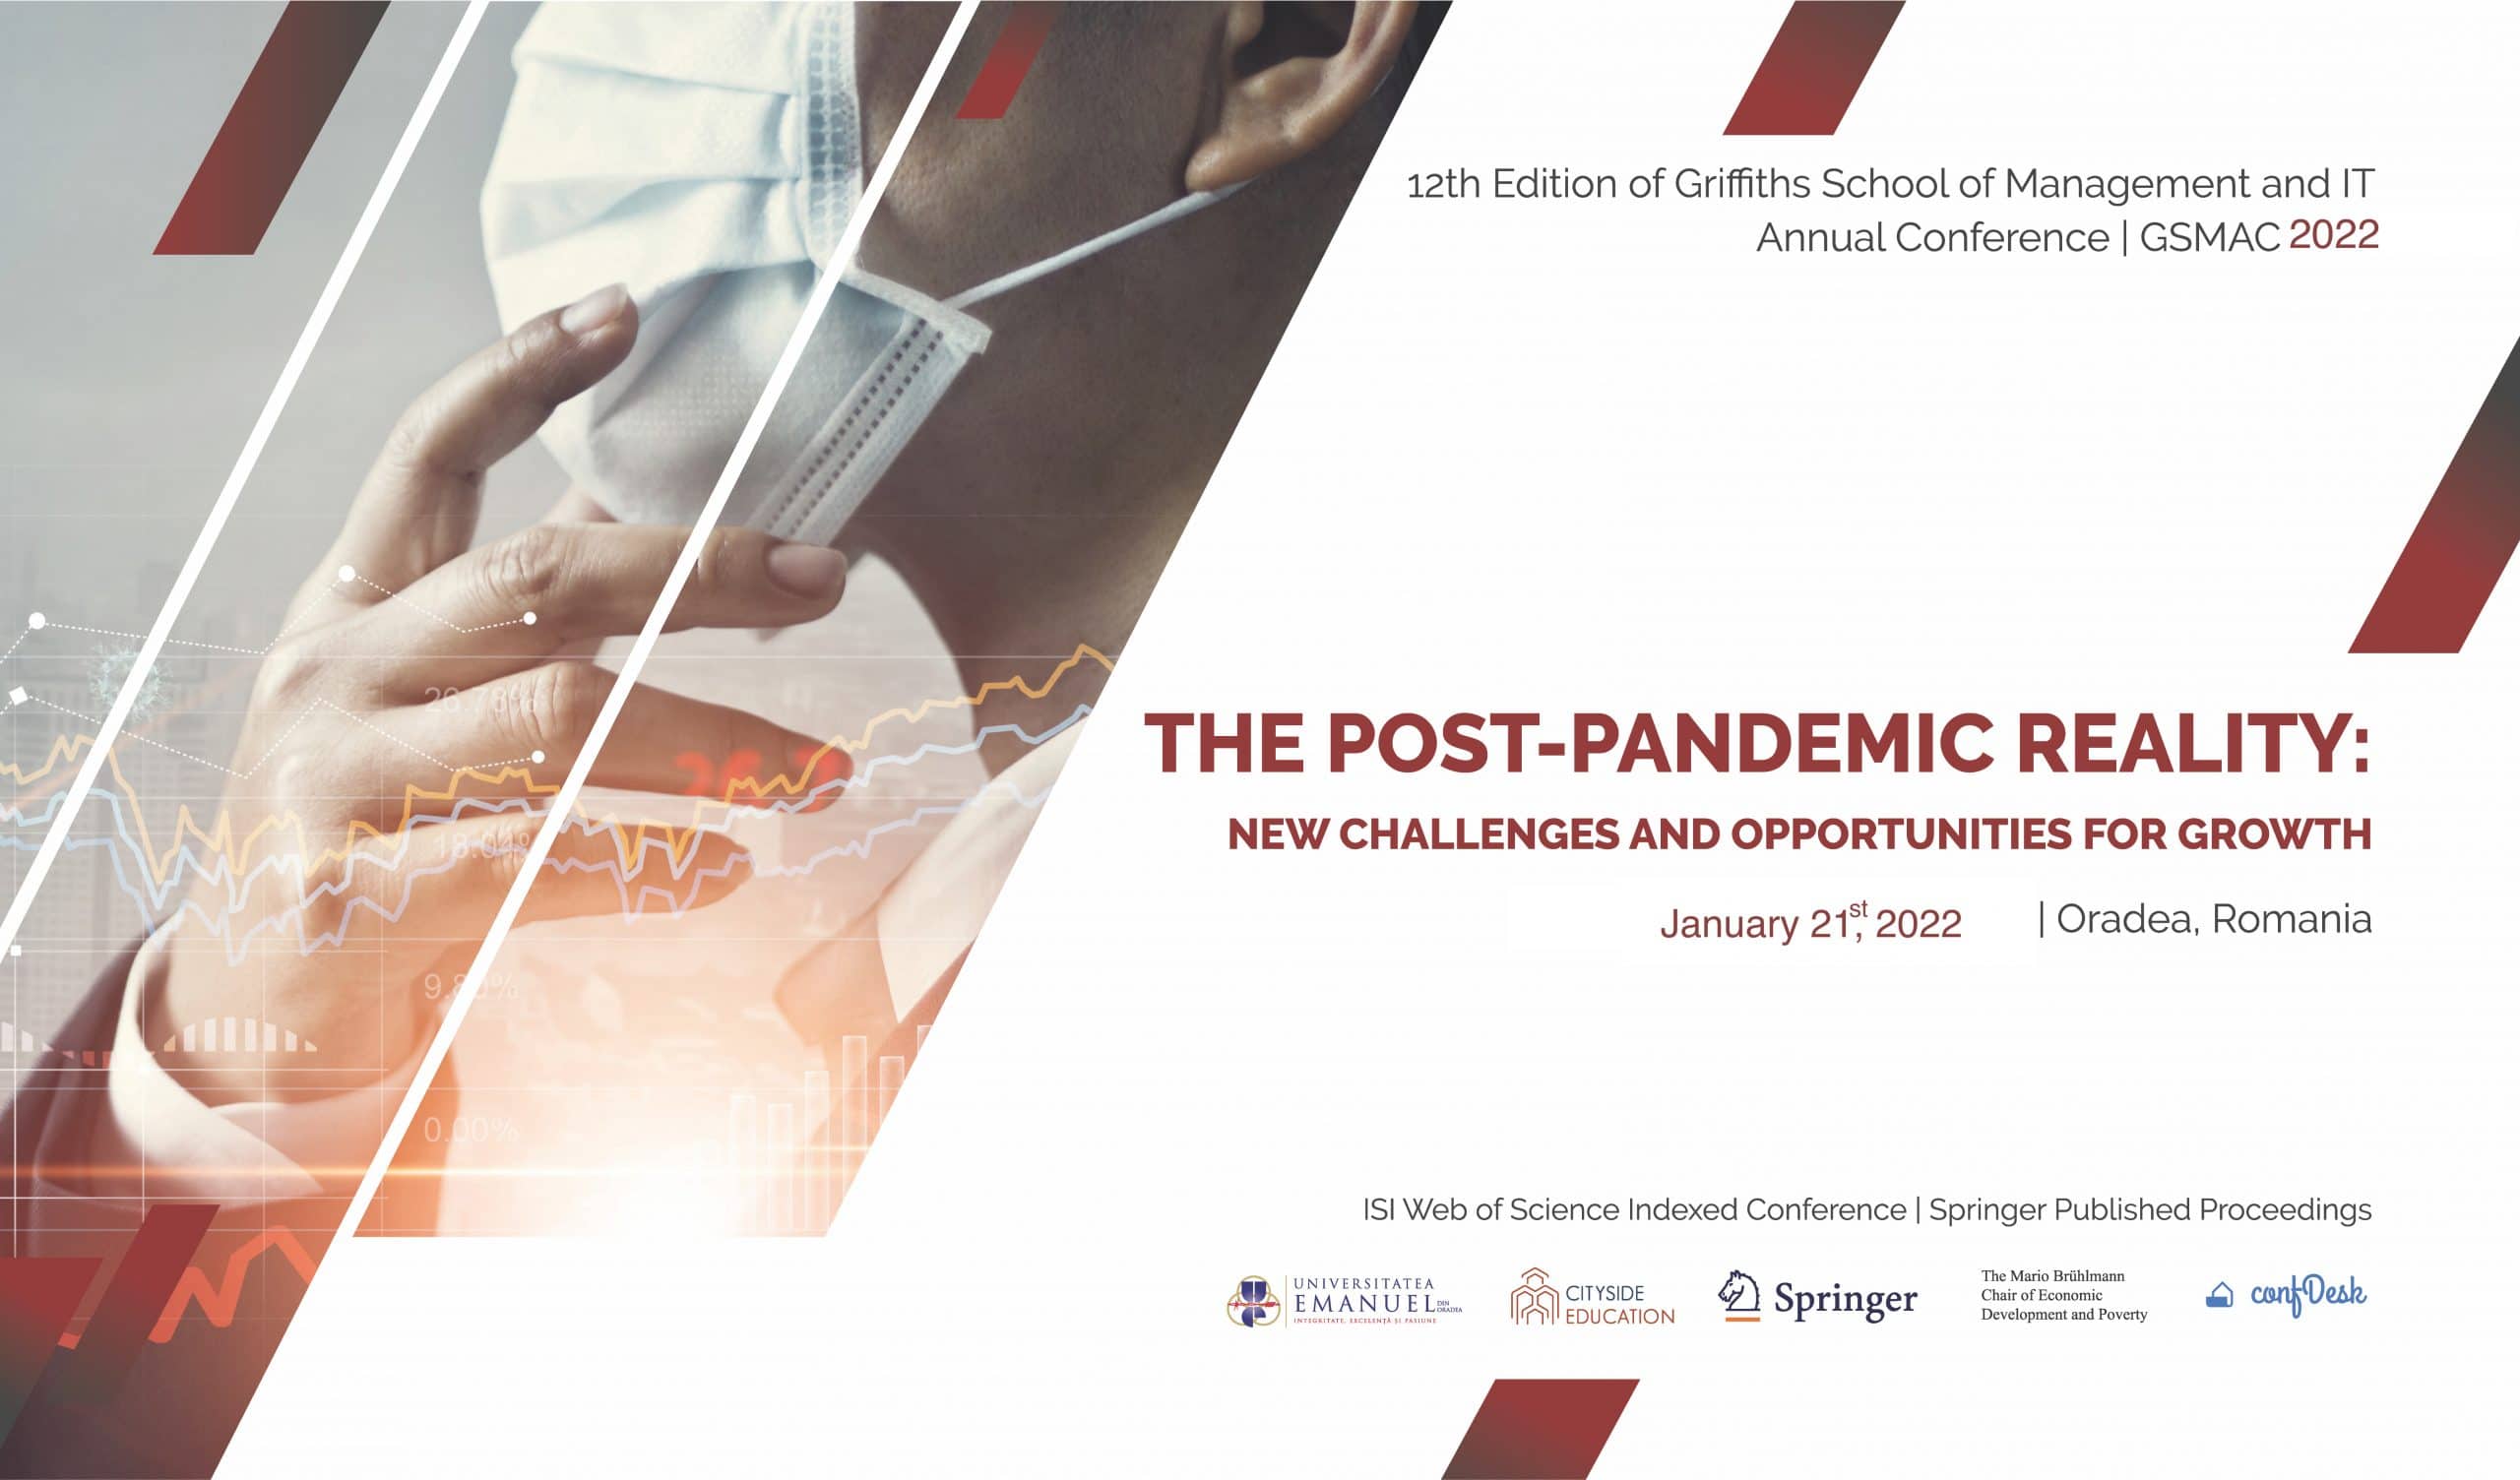 GSMAC 2022 –  The post-pandemic reality: new challenges and opportunities for growth.